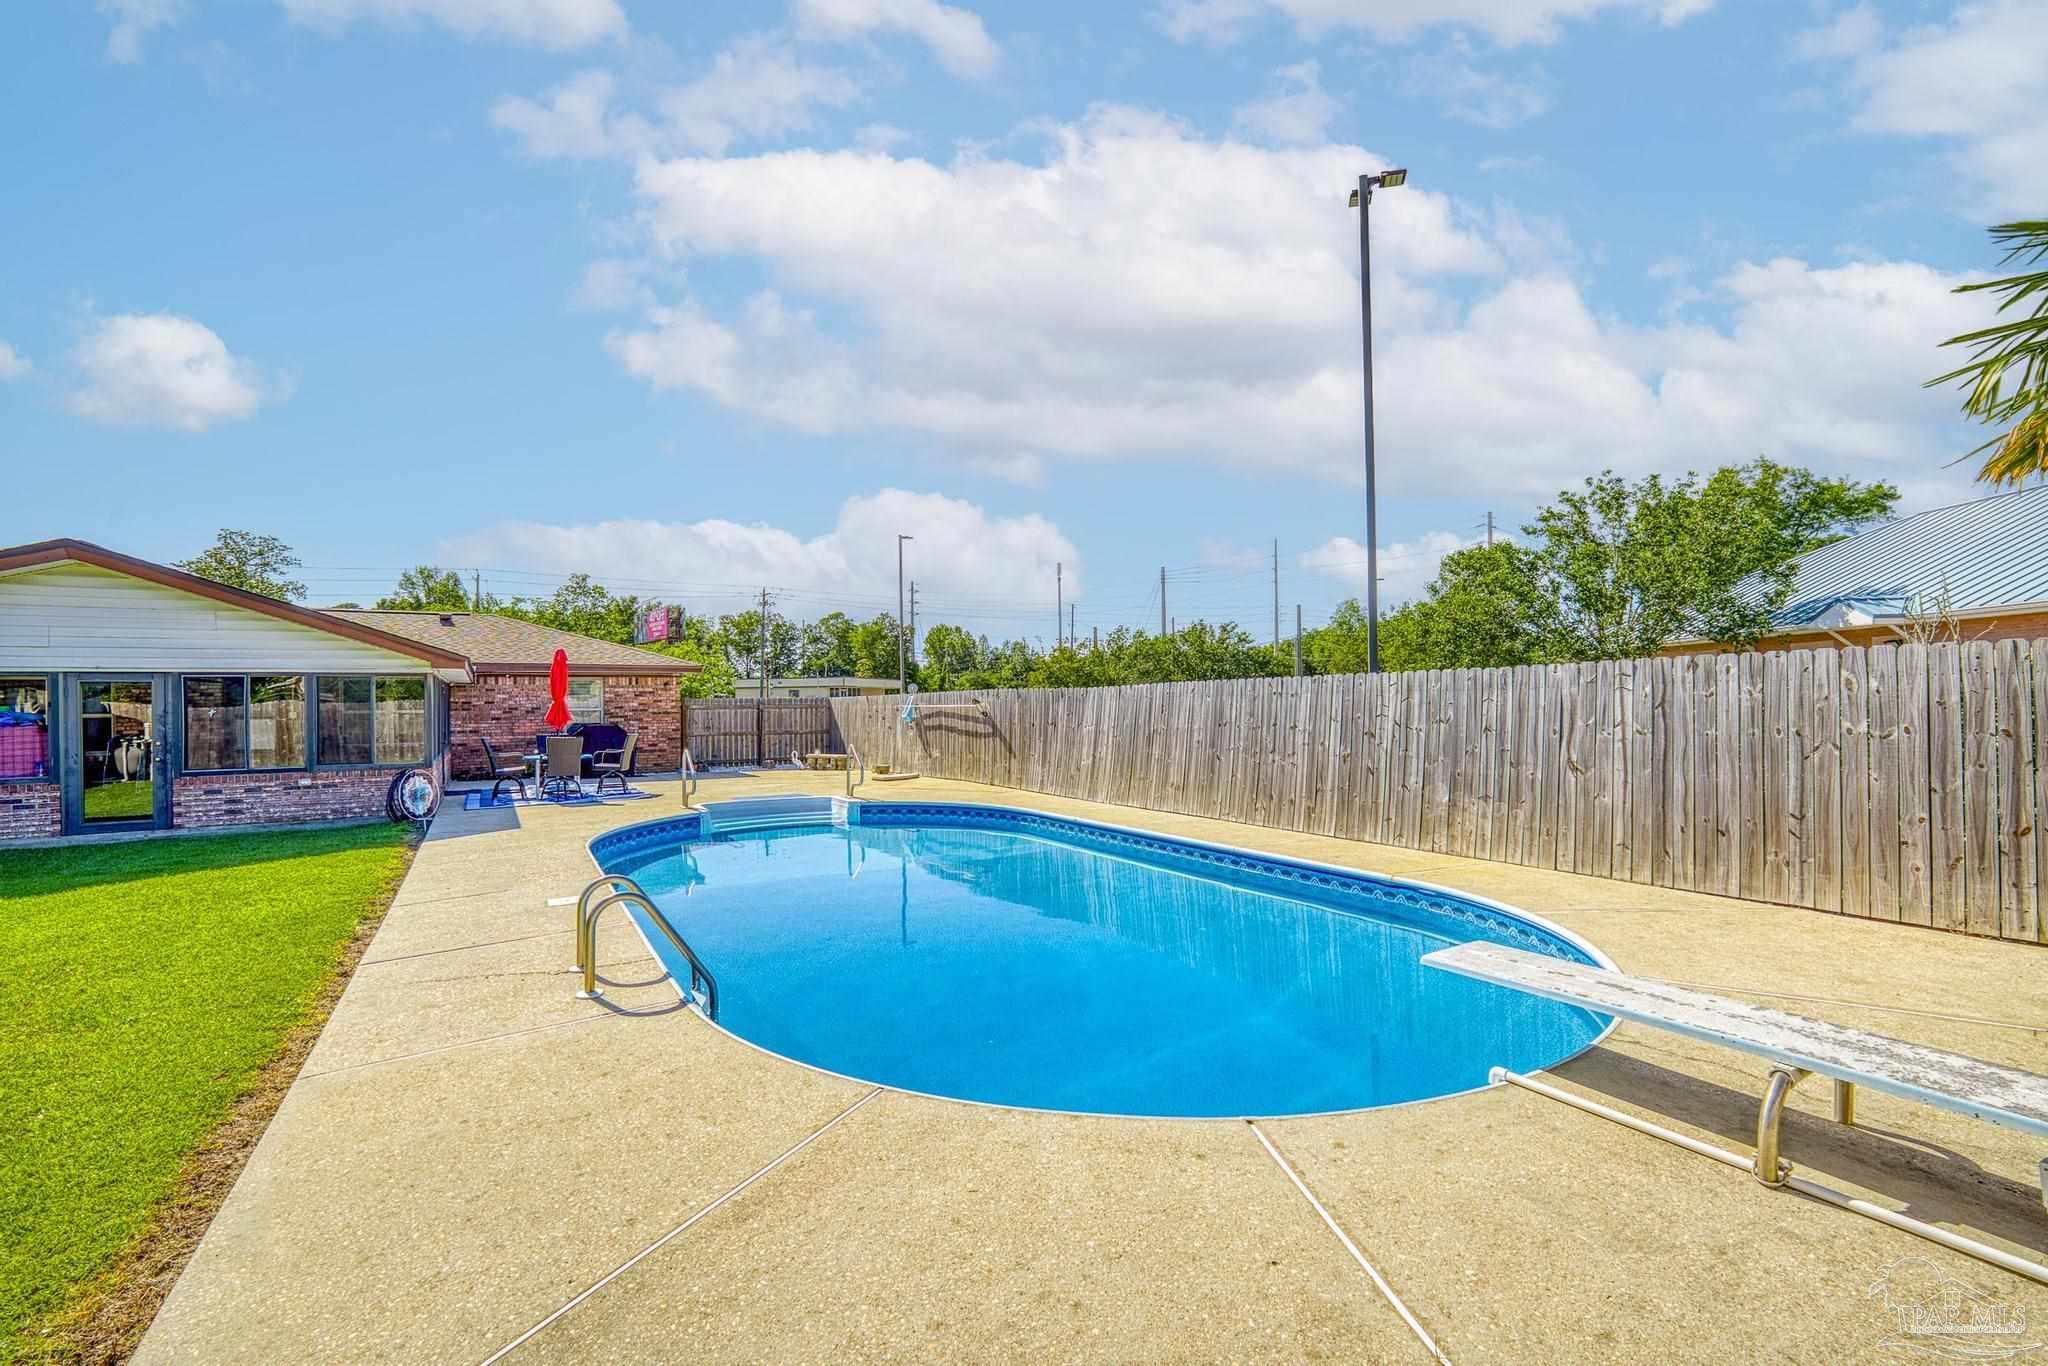 a view of swimming pool with outdoor seating and yard in back